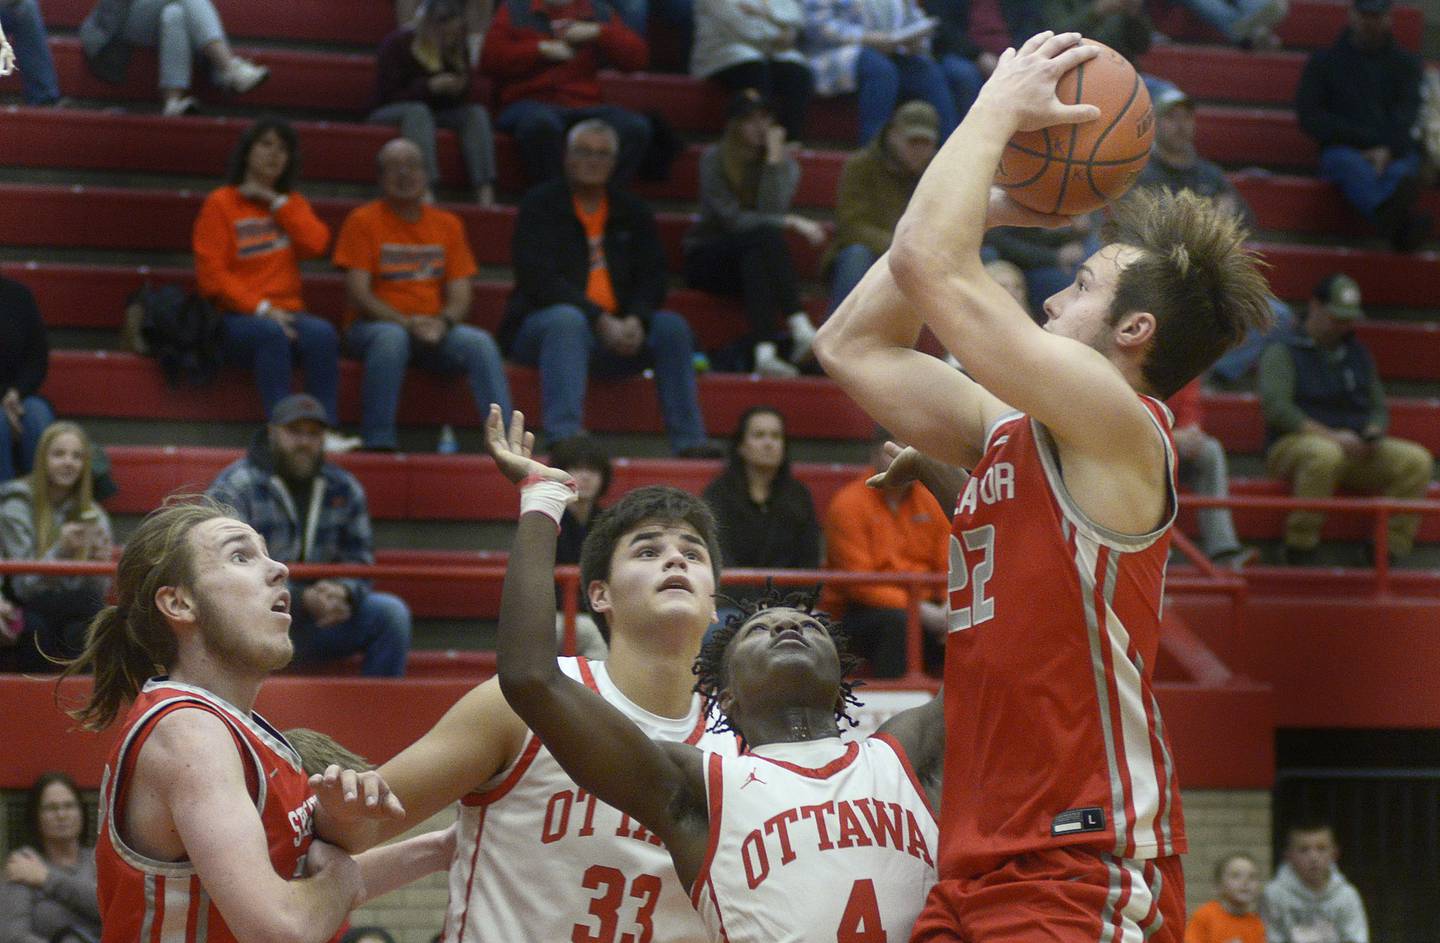 Streator’s Christian Benning shoots over Ottawa’s Keevon Peterson, Cooper Knoll and team mate Quinn Baker  in the 4th period Saturday during the Dean Riley Shootin’ The Rock Thanksgiving Tournament at Ottawa.